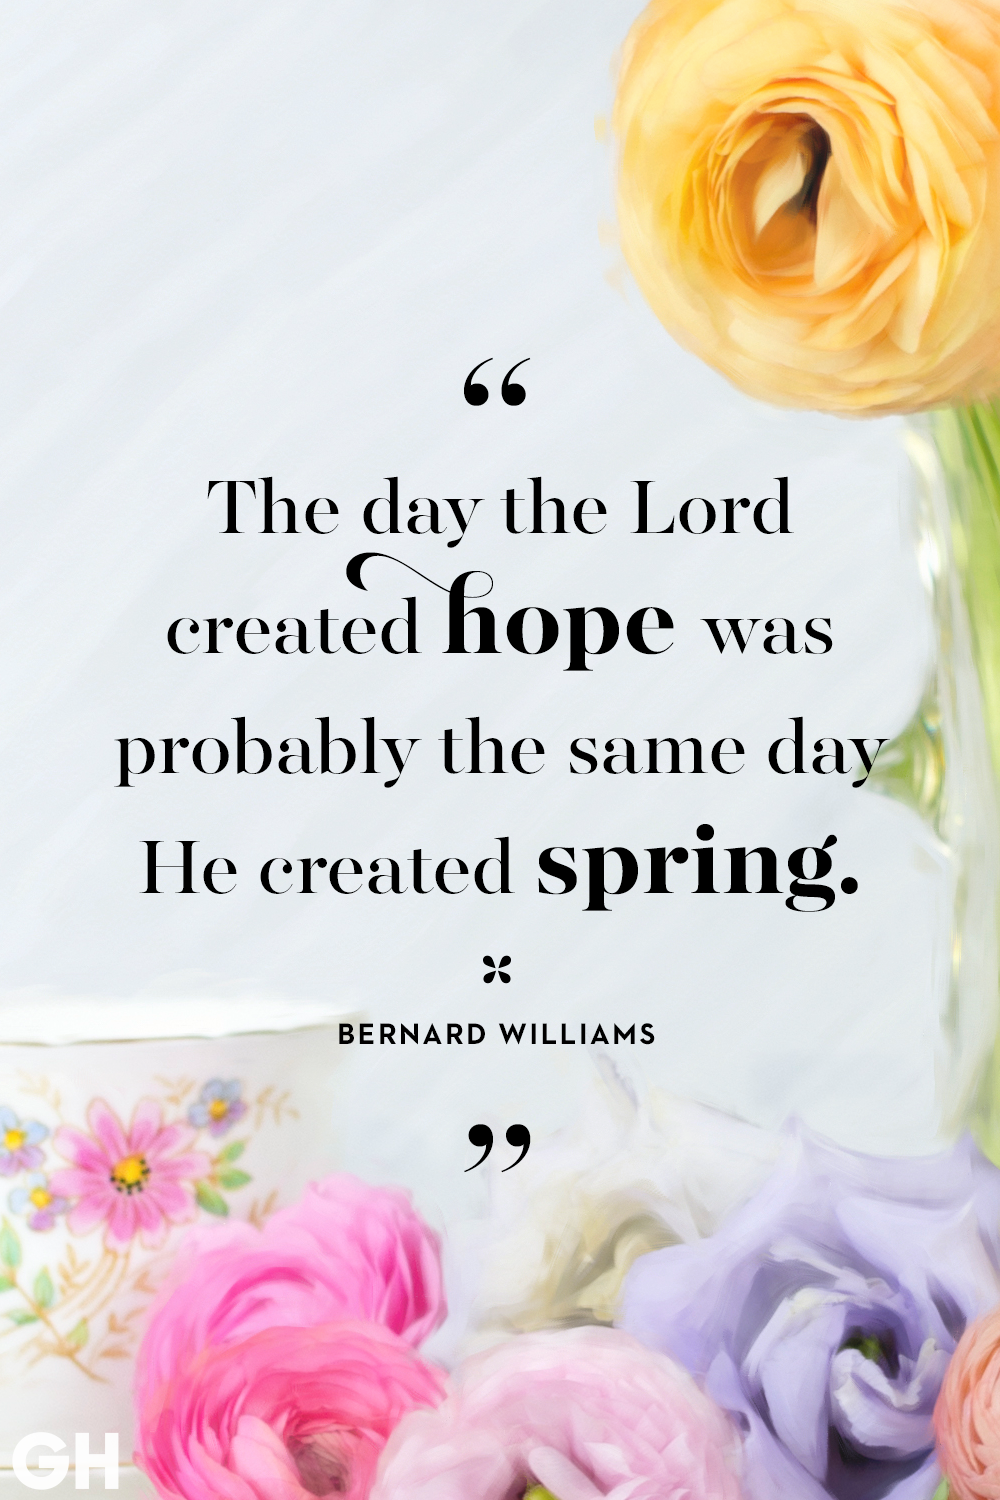 35 Best Easter Quotes - Famous Sayings About Hope and Spring